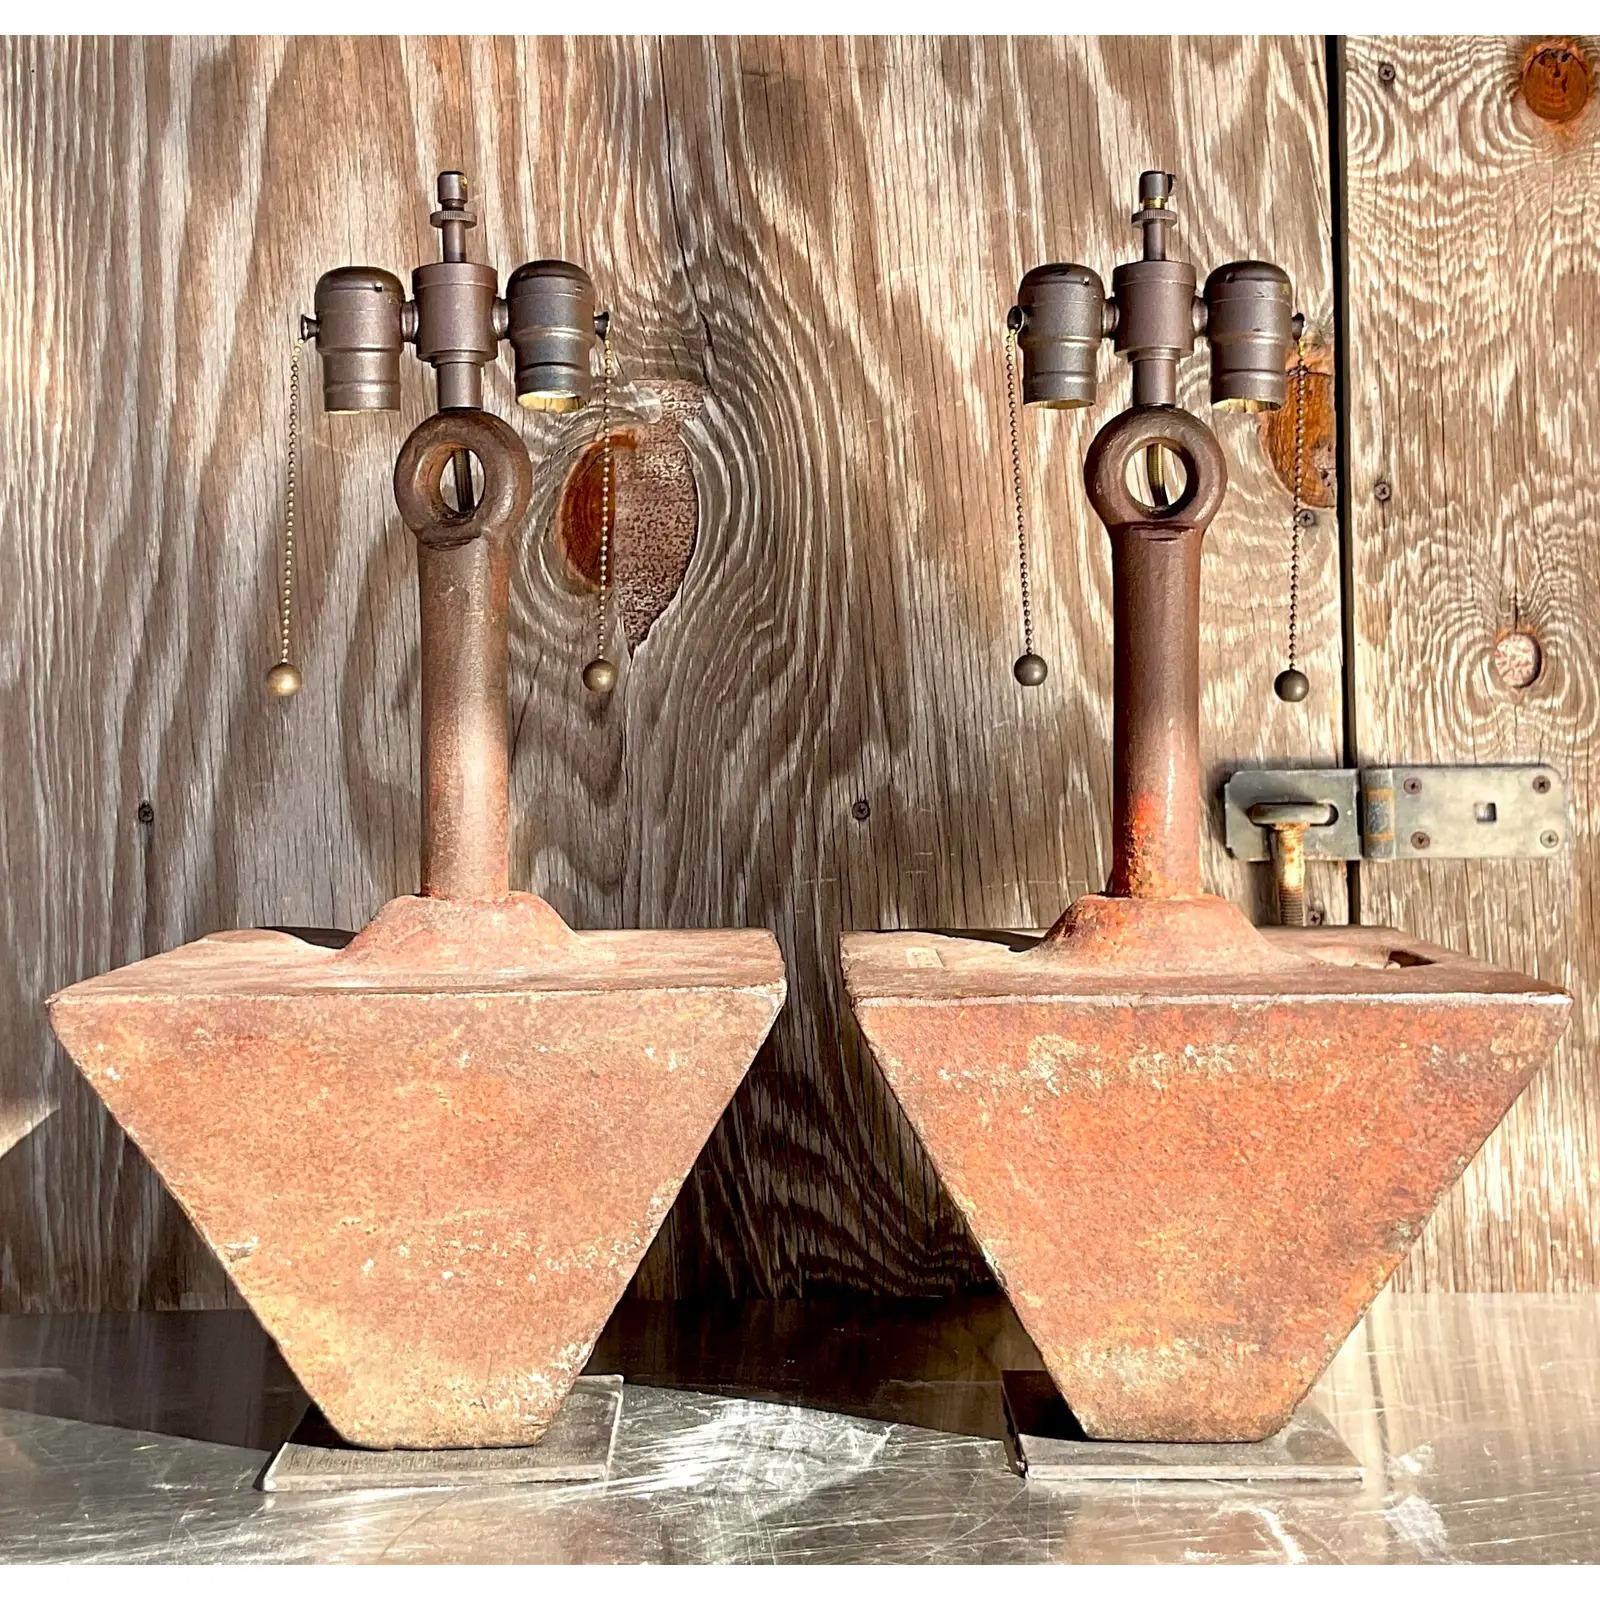 An incredible pair of vintage Boho Lamps. Awesome rusty iron boat 75lb weights. A chic pyramid shapes and marked 75. Acquired from a Newport estate designed by the celebrated designer James Huniford.